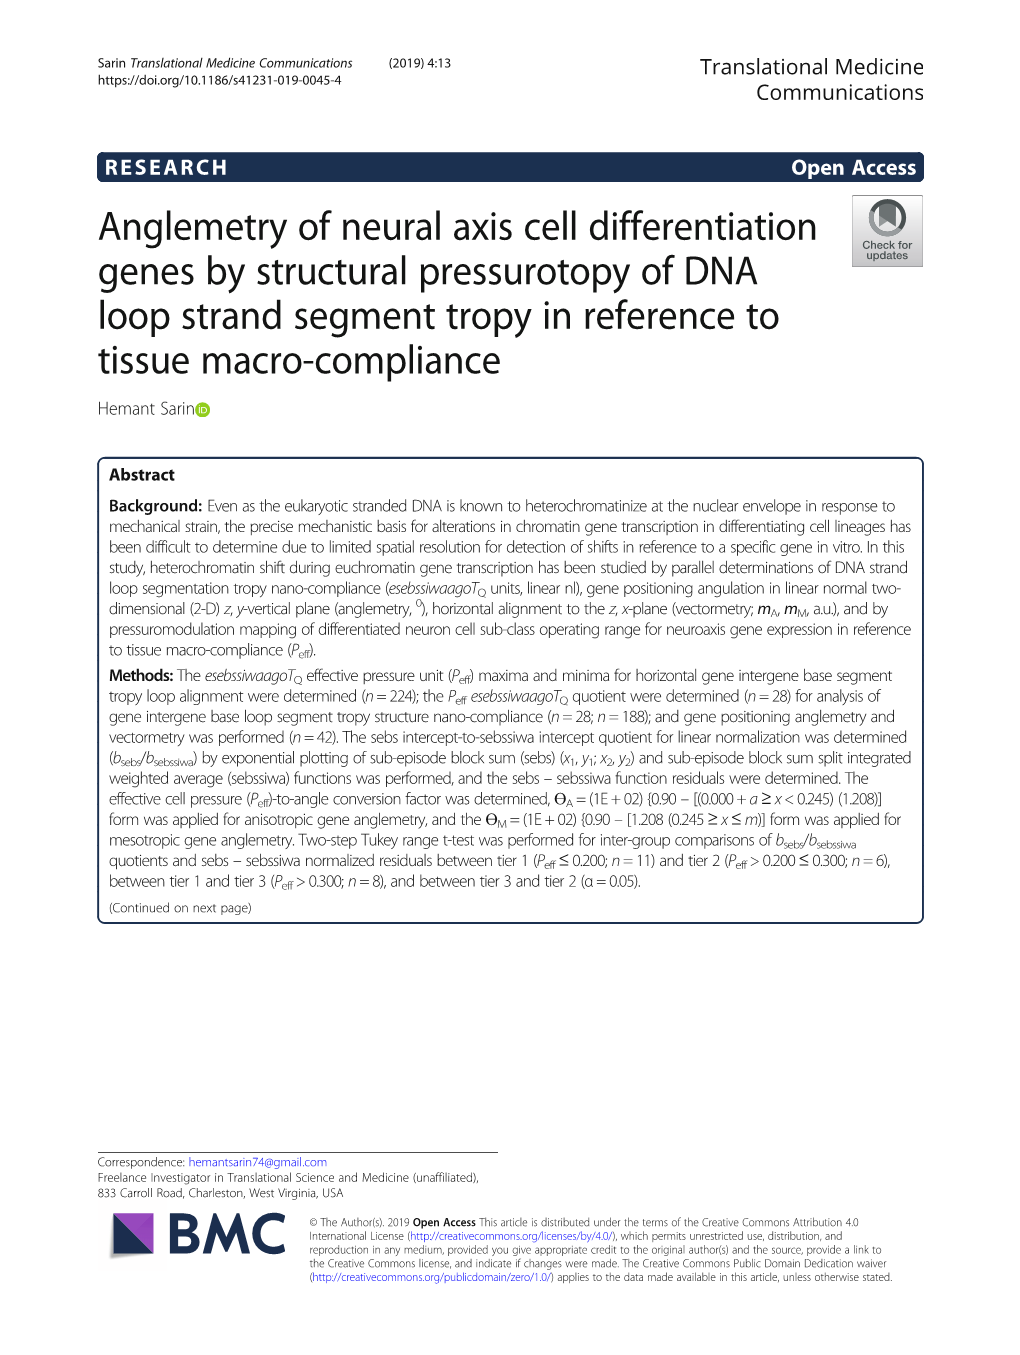 Anglemetry of Neural Axis Cell Differentiation Genes by Structural Pressurotopy of DNA Loop Strand Segment Tropy in Reference to Tissue Macro-Compliance Hemant Sarin